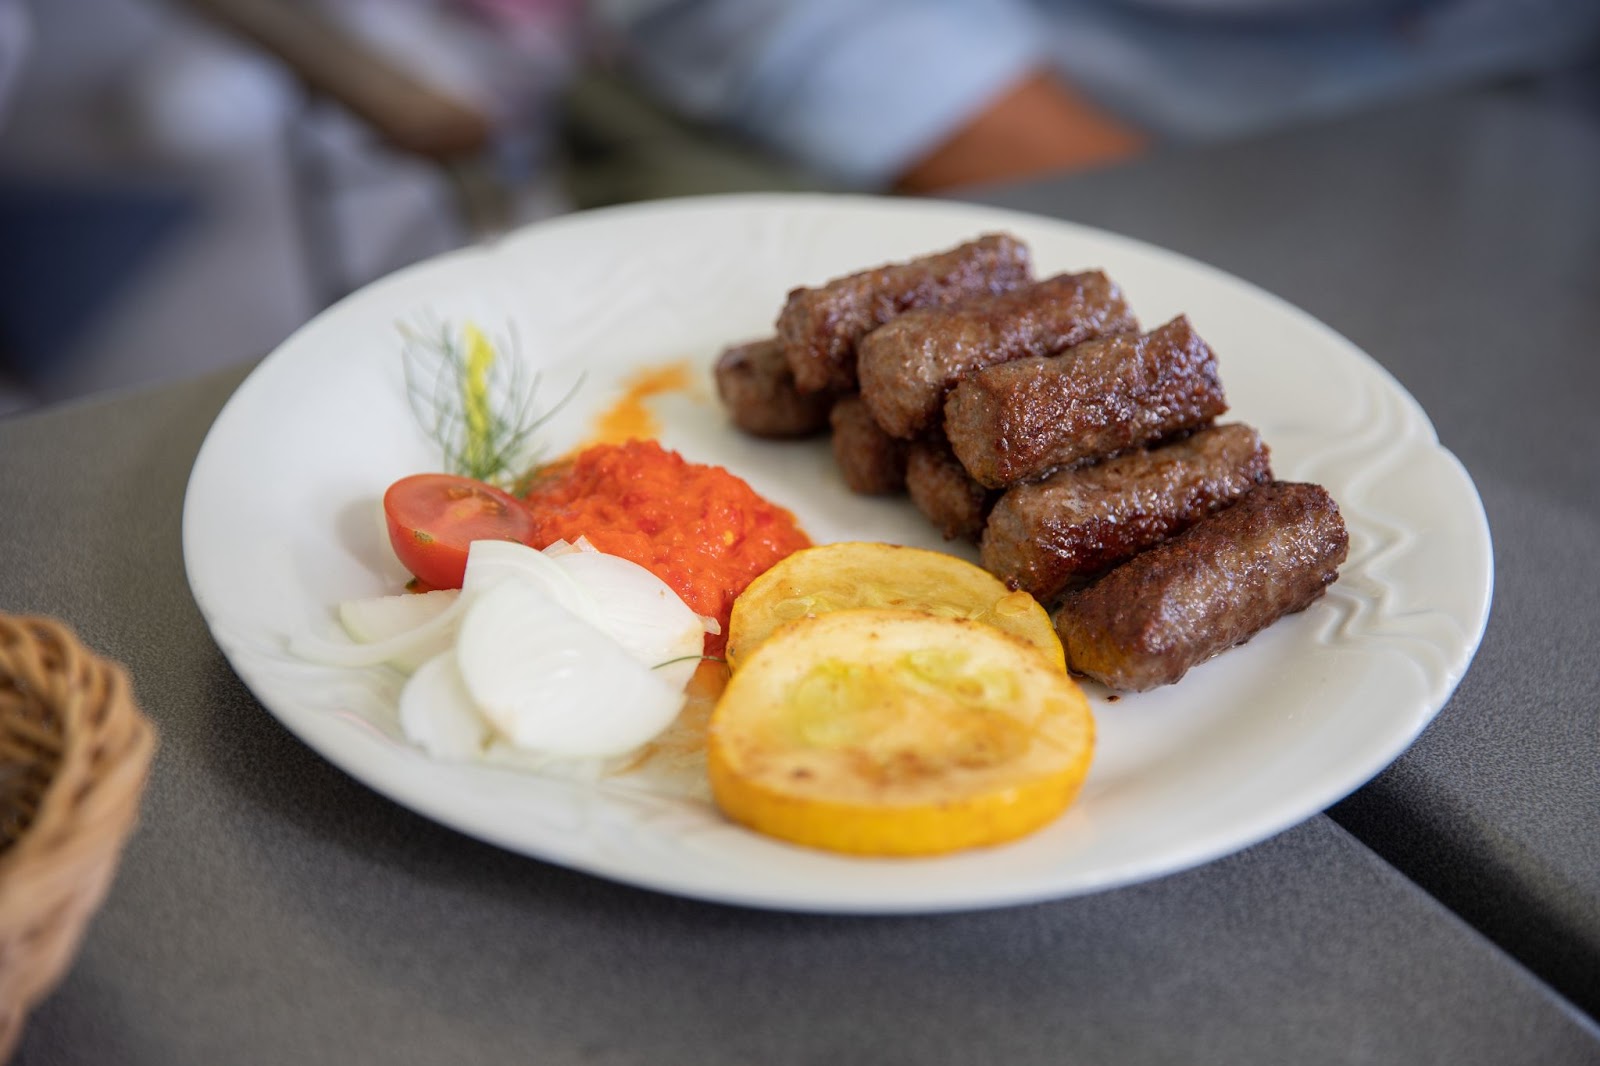 Belgrade is home to a diverse culinary scene, from hearty Serbian dishes to international flavors.